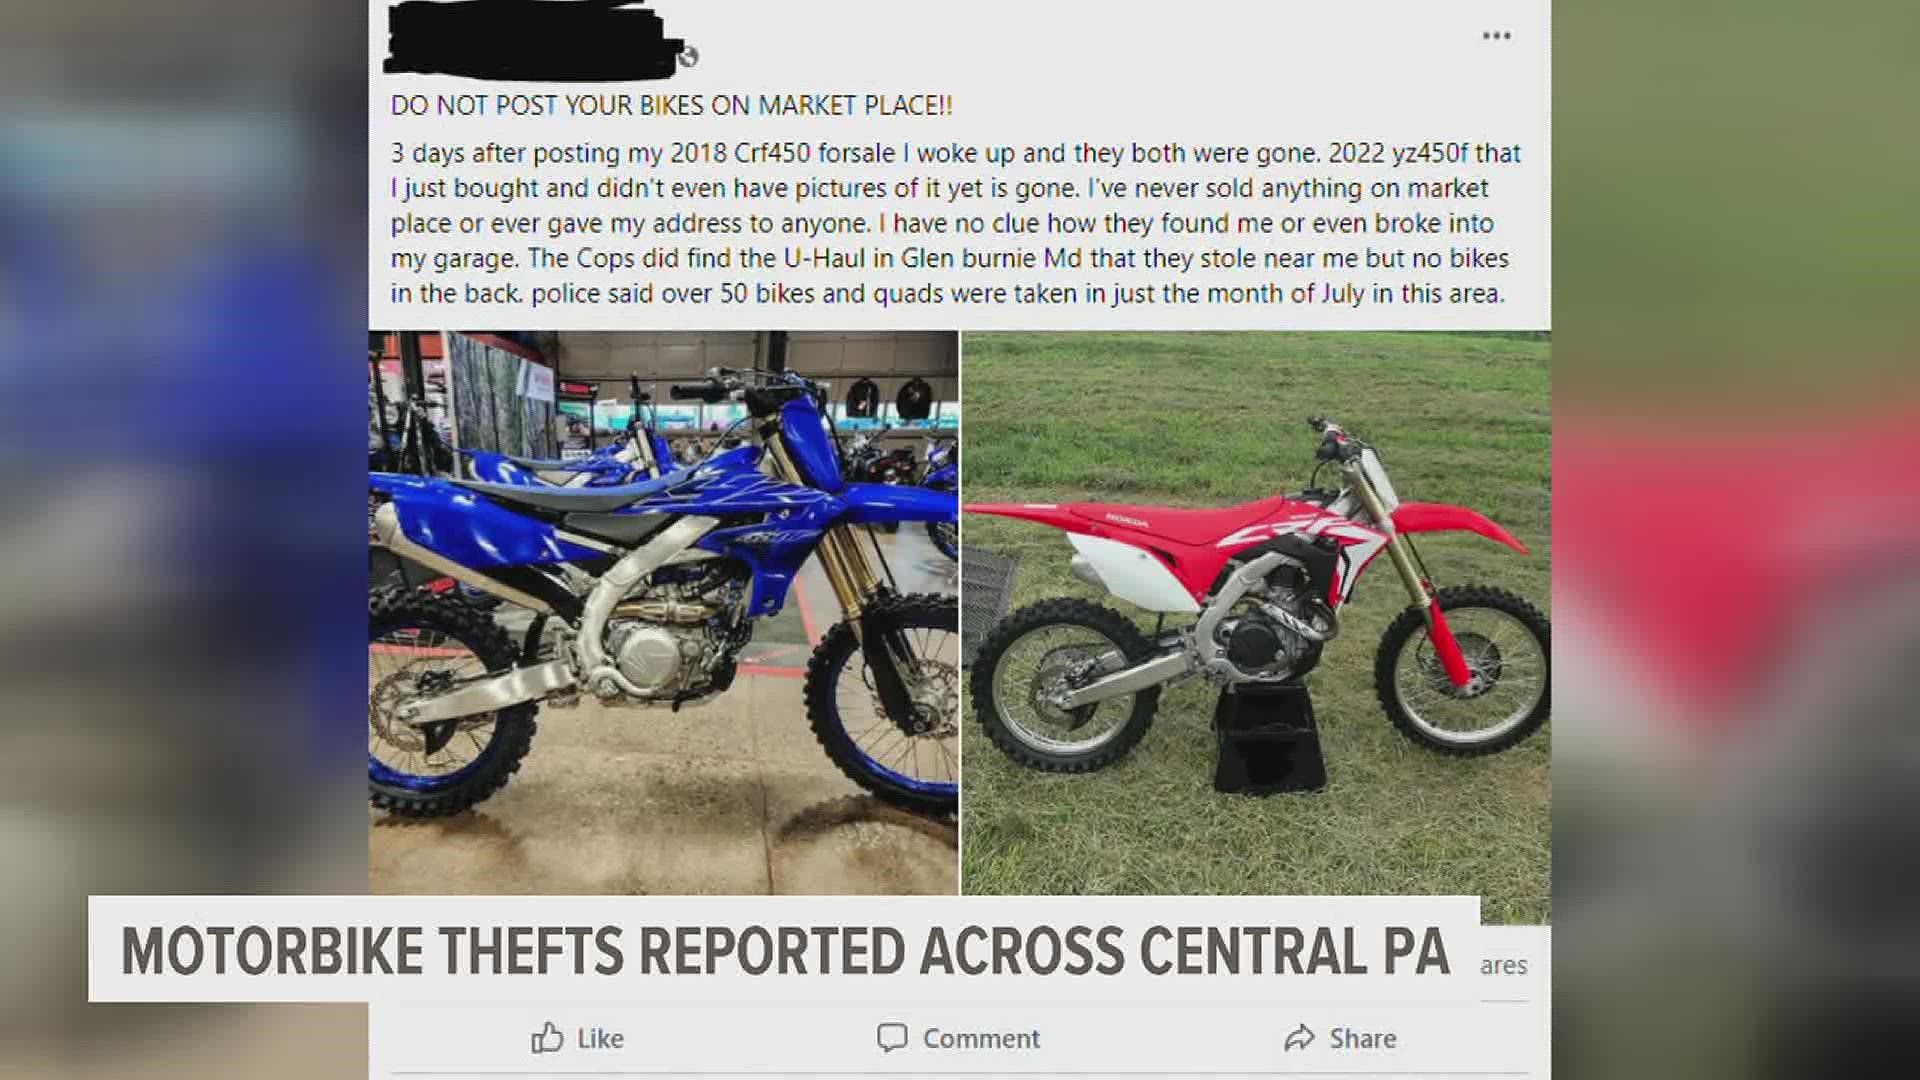 Victims say their bikes were stolen after being put up for sale on Facebook Marketplace.